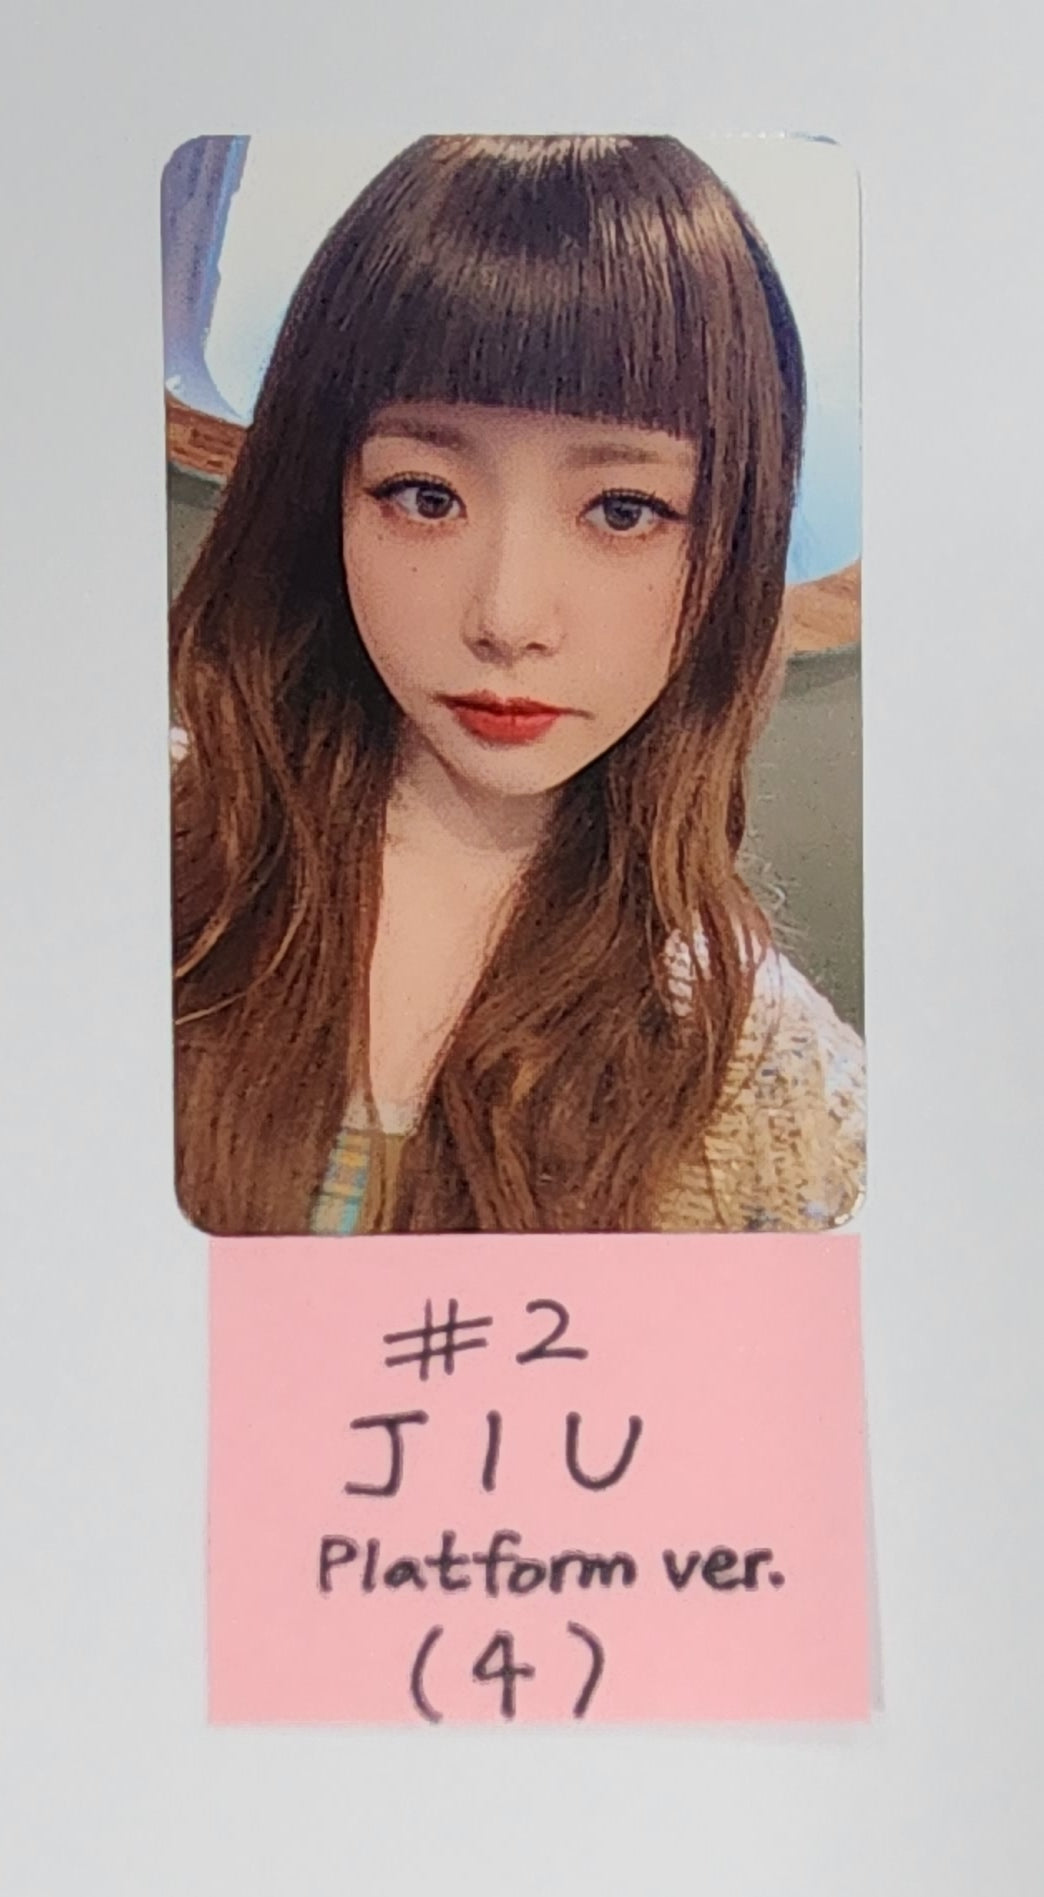 Dreamcatcher - "Apocalypse : From us" - Official Photocard [Platform Ver.] [Updated 5/31]